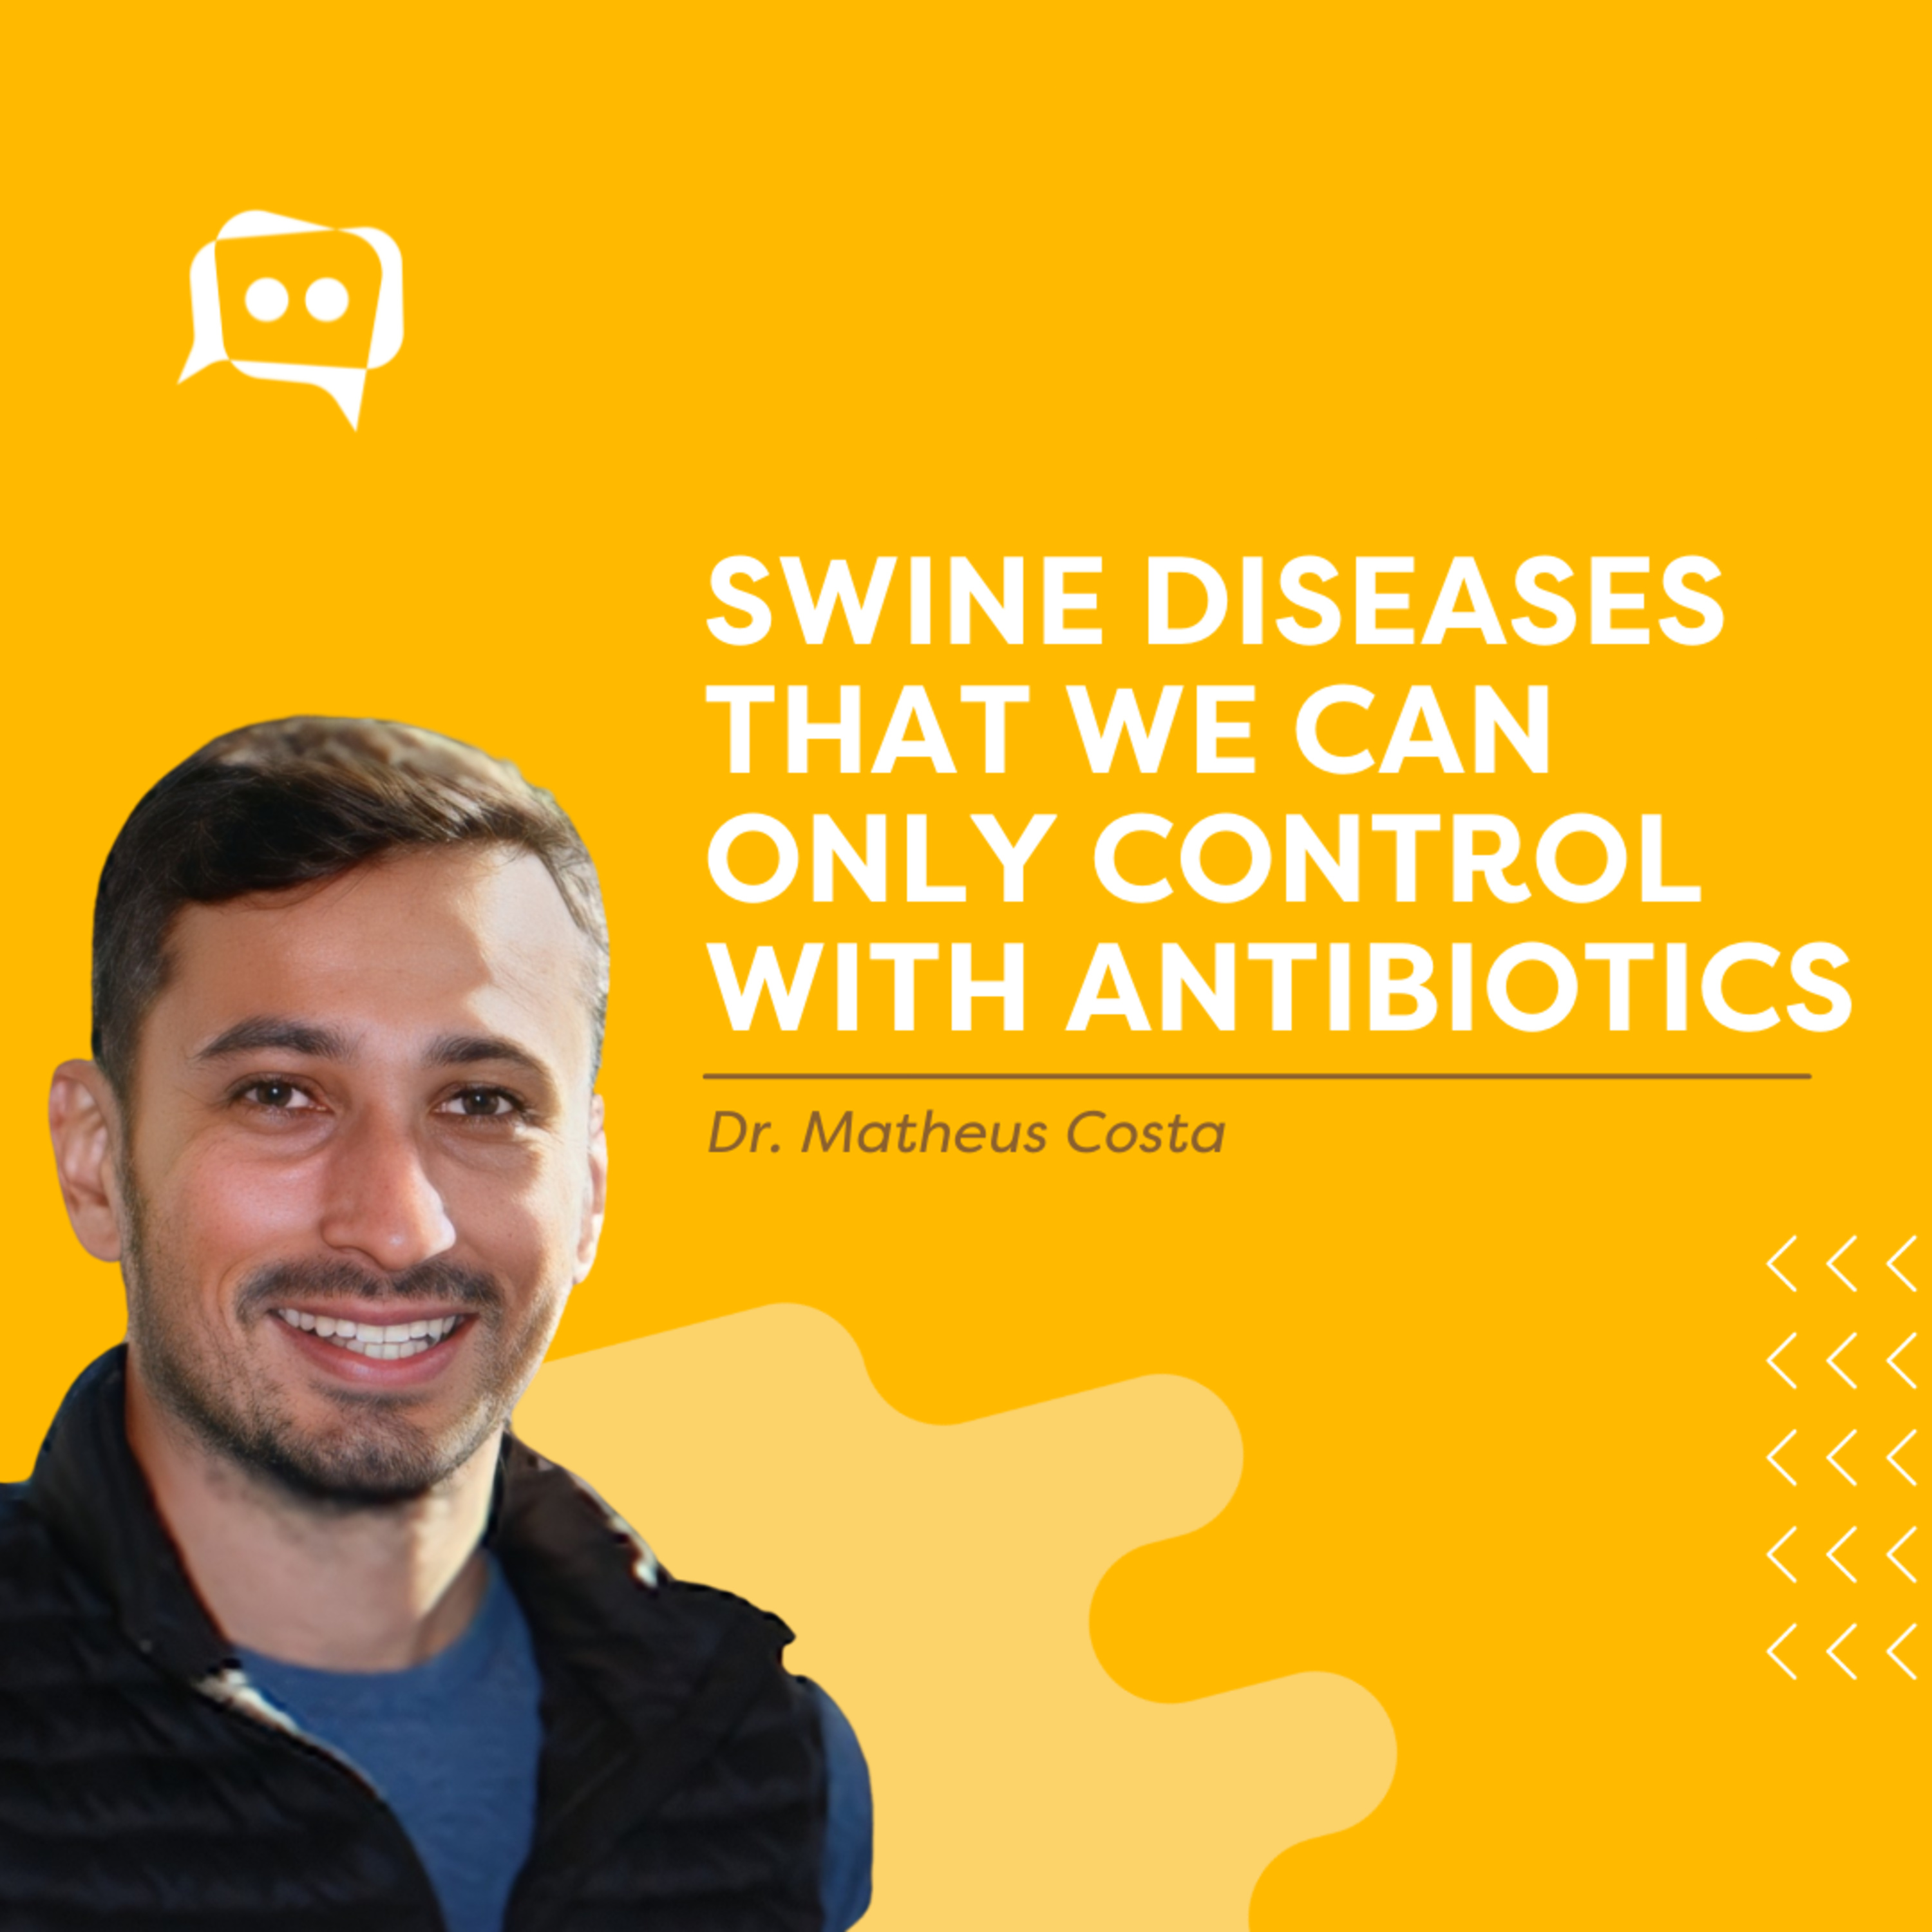 #SHORTS: Swine diseases that we can only control with antibiotics, with Dr. Matheus Costa